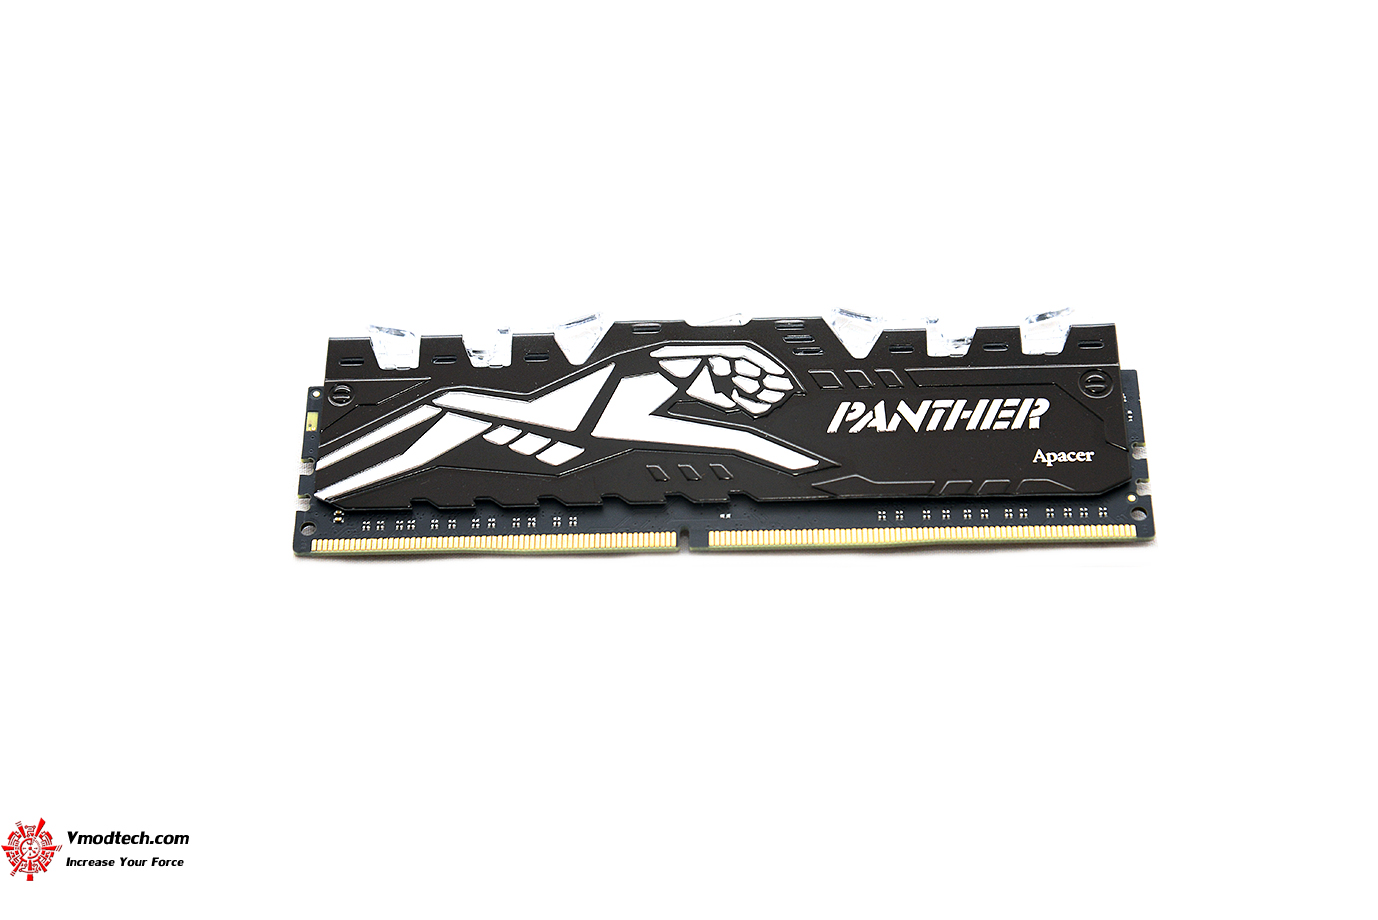 dsc 1322 Apacer Panther Rage Illumination DDR4 2400 16GB Review 